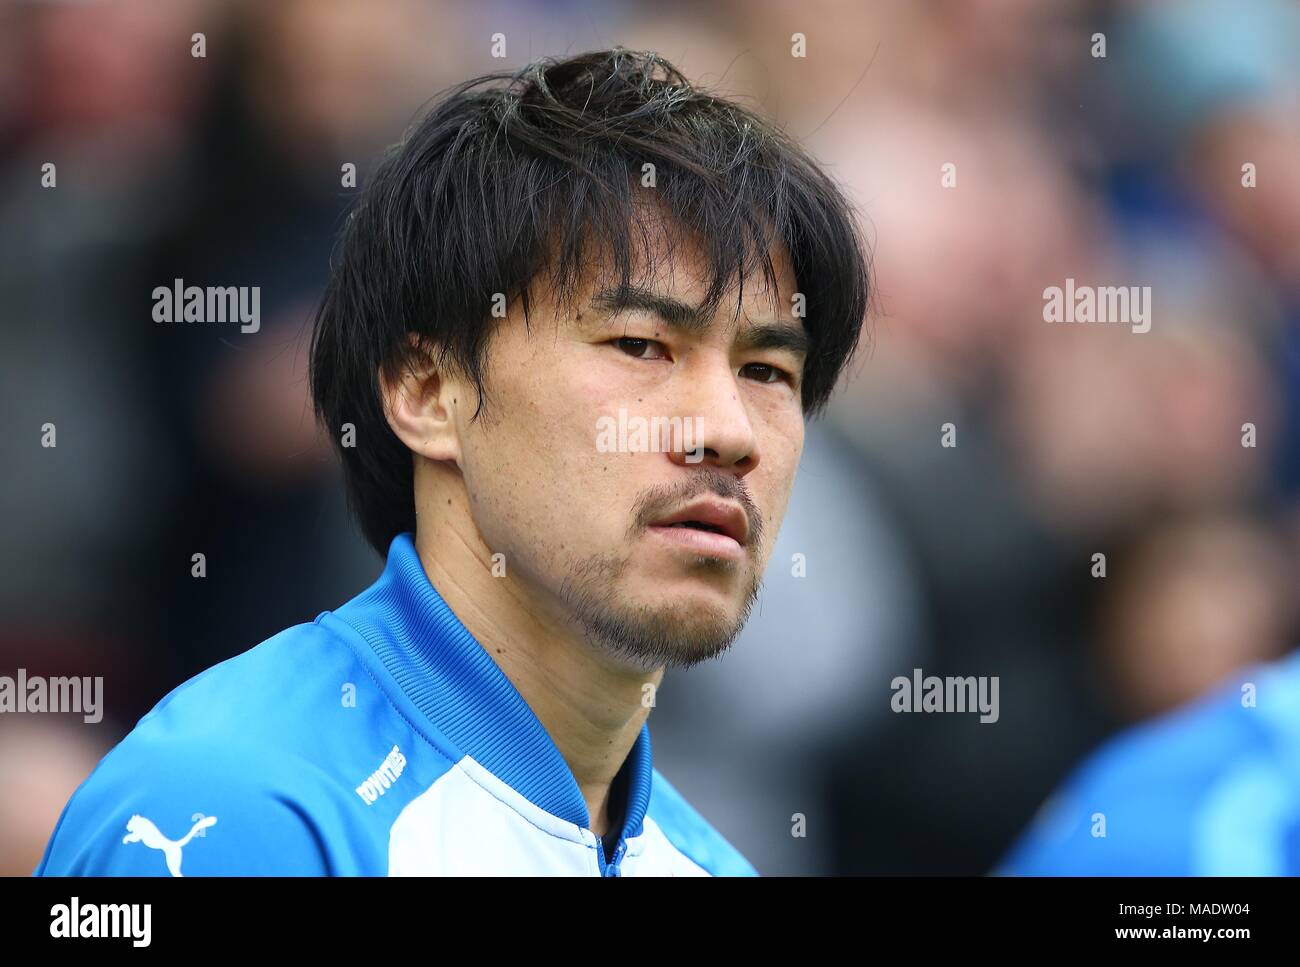 Japanese forward Shinji Okazaki of Leicester during the Premier League match between Brighton and Hove Albion and Leicester City at the American Express Community Stadium in Brighton and Hove. 31 Mar 2018 *** Editorial use only. No merchandising. For Football images FA and Premier League restrictions apply inc. no internet/mobile usage without FAPL license - for details contact Football Dataco *** Stock Photo